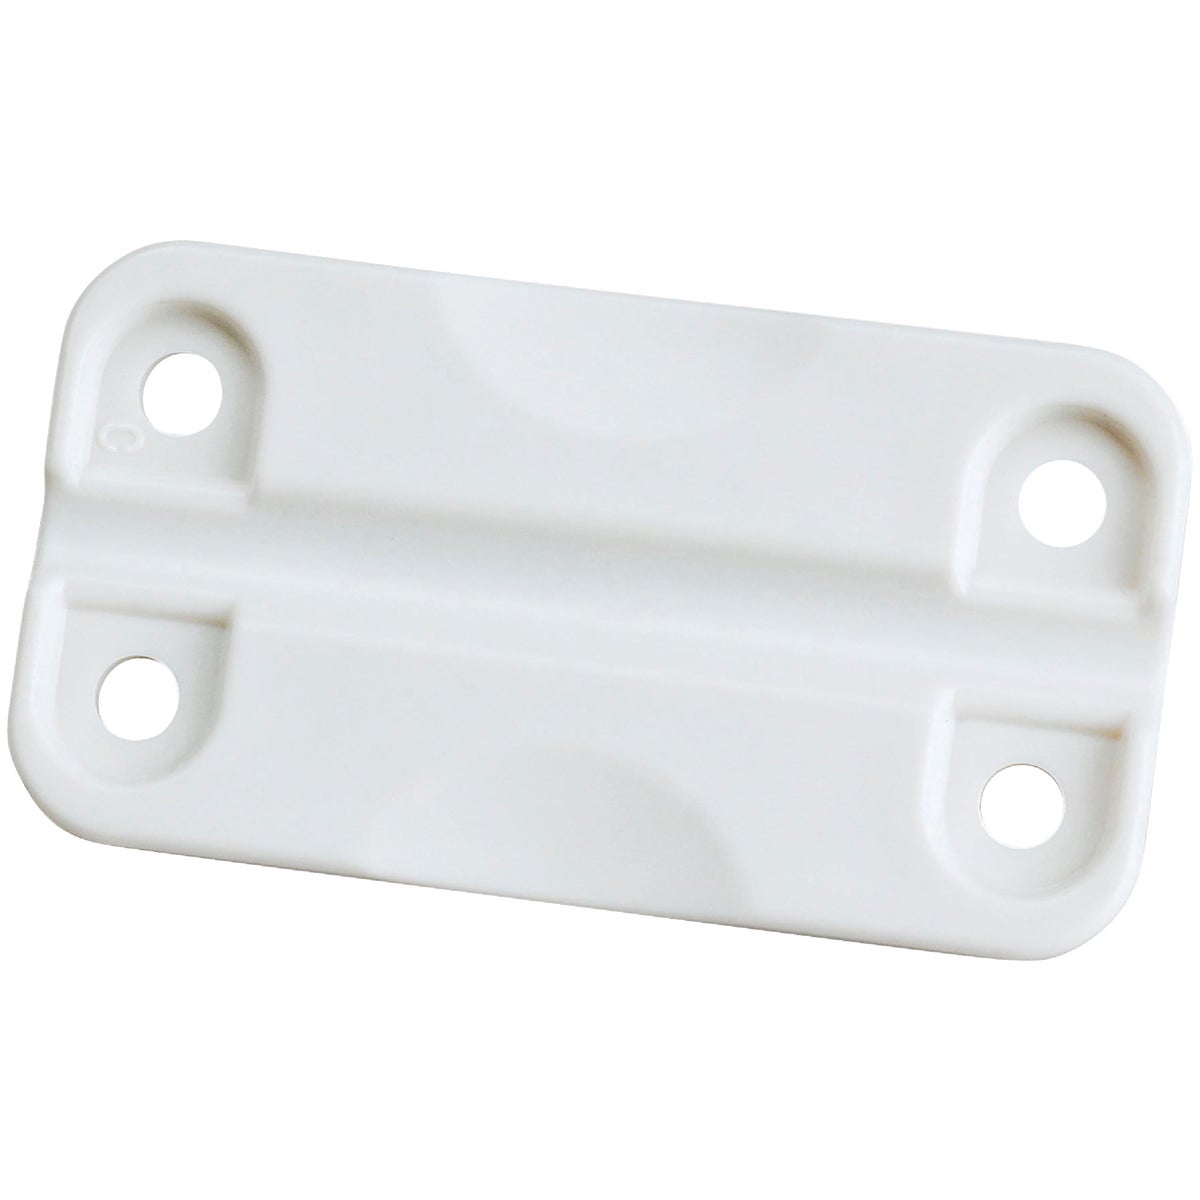 Item 802821, Replacement cooler hinge for Igloo coolers only.